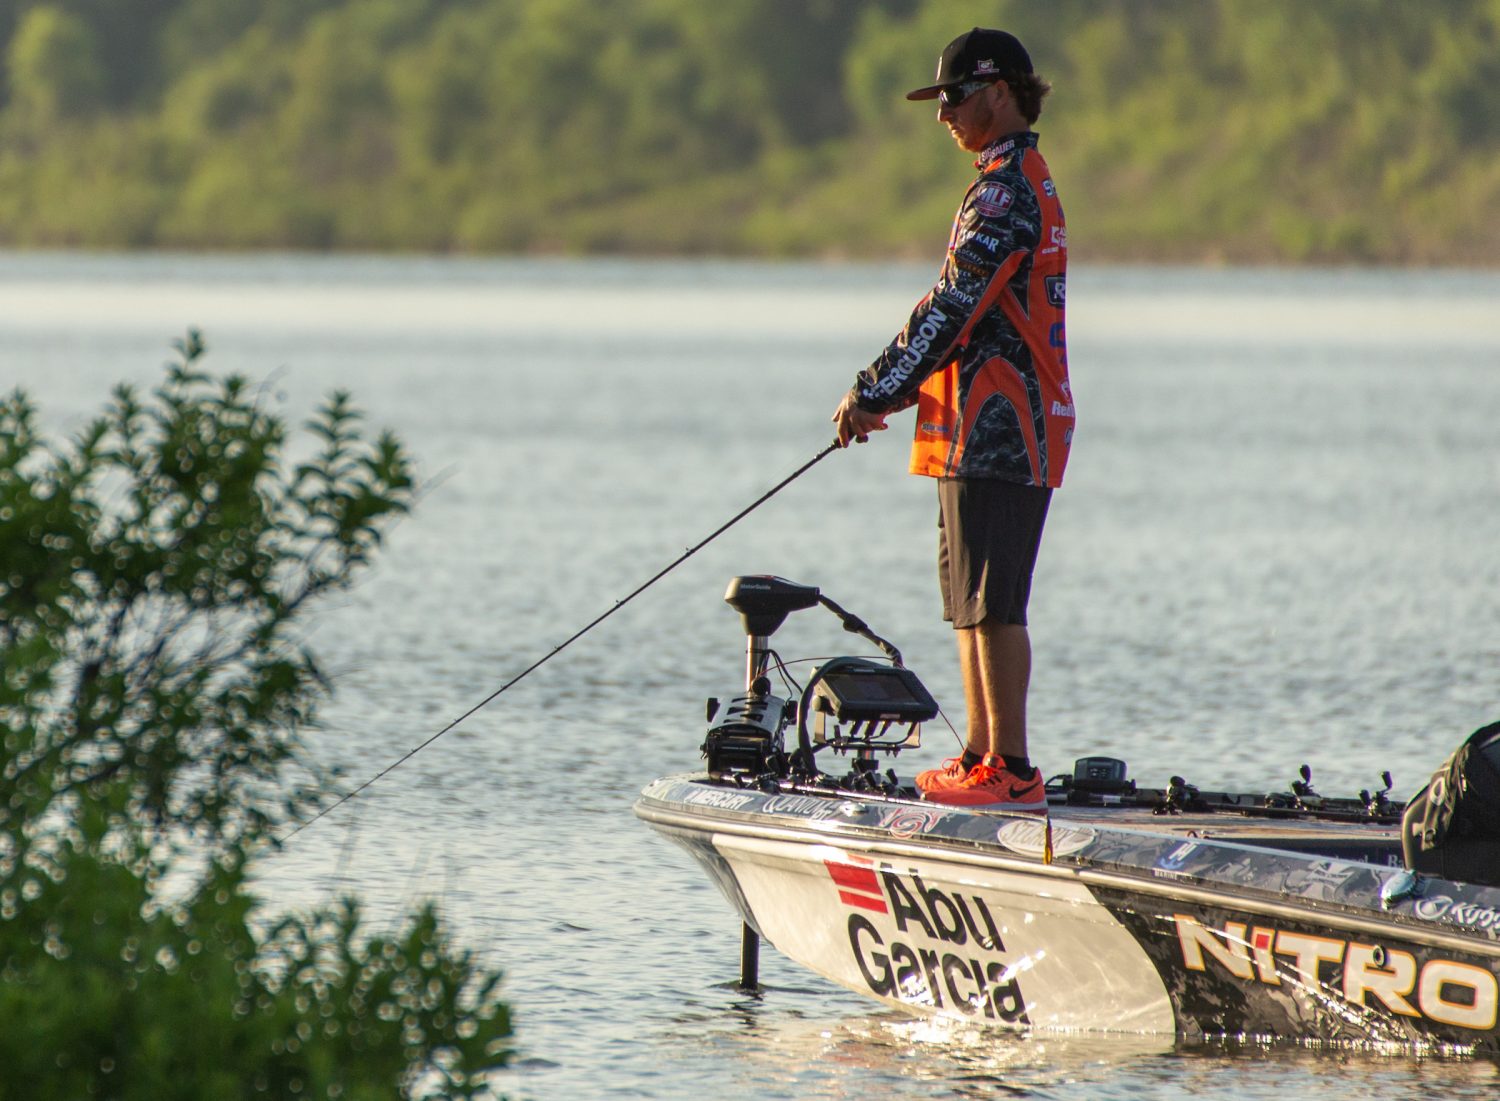 Abu Garcia, Berkley Expand MLF Support to Include Bass Pro Tour – Anglers  Channel